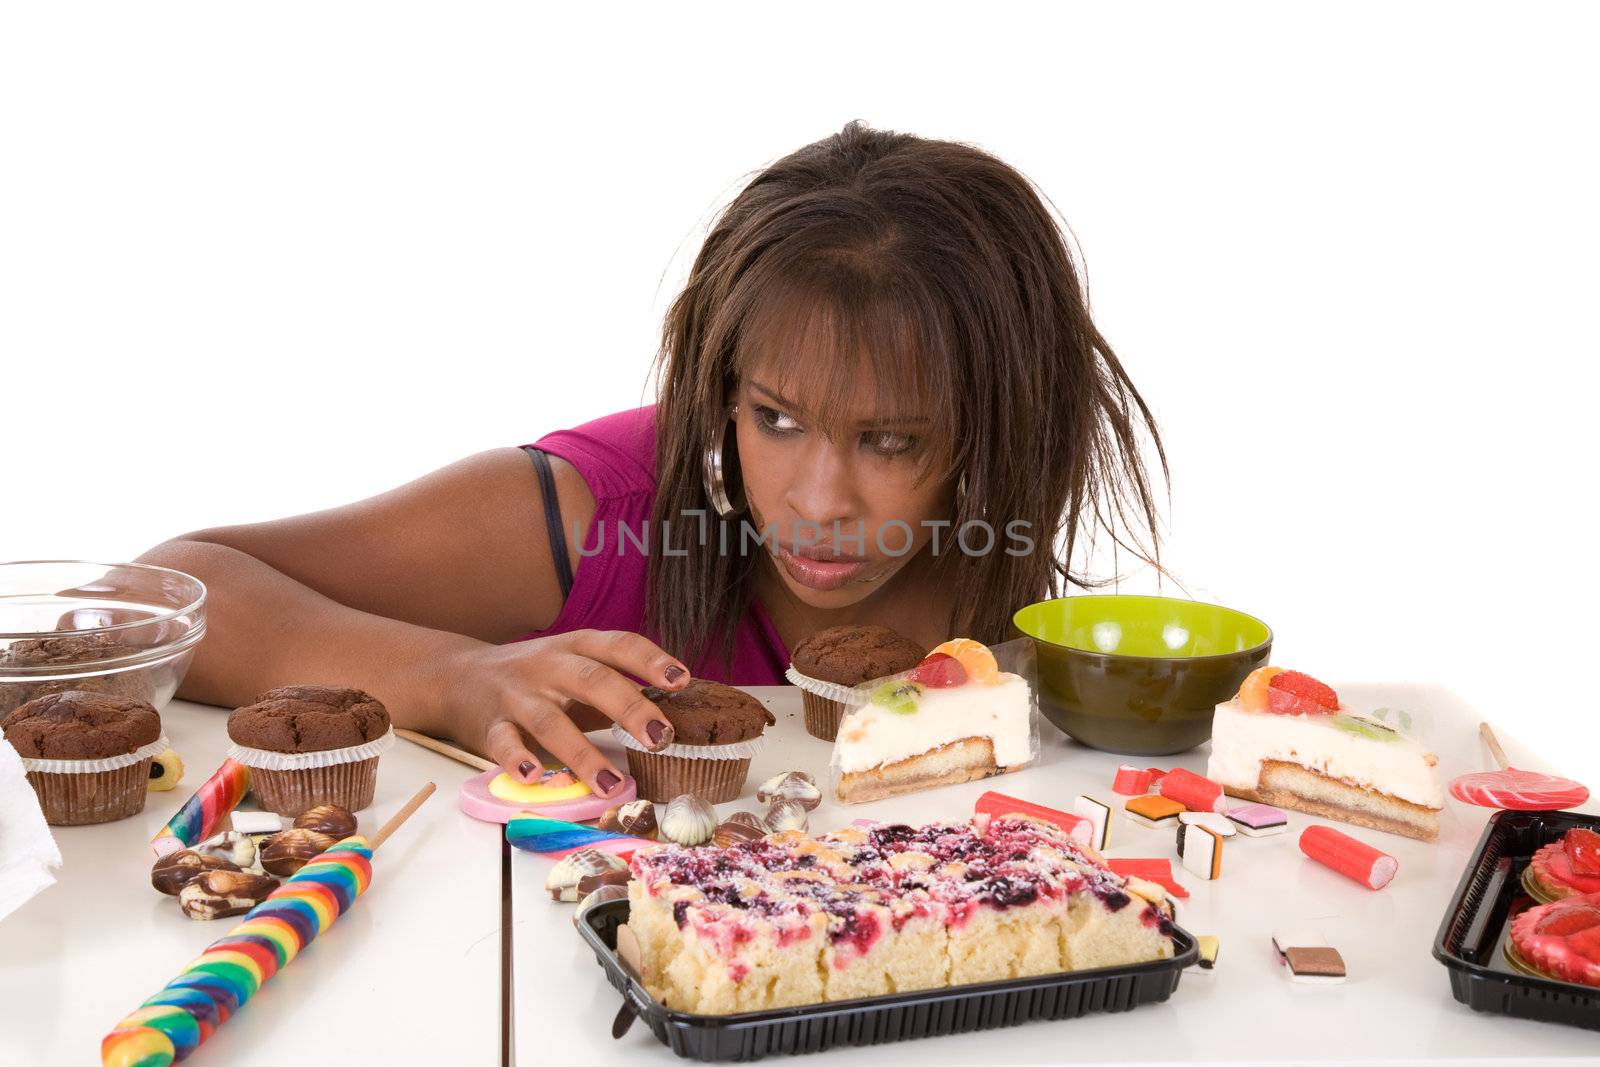 Pretty black girl looking very greedy at all the sweets in front of her